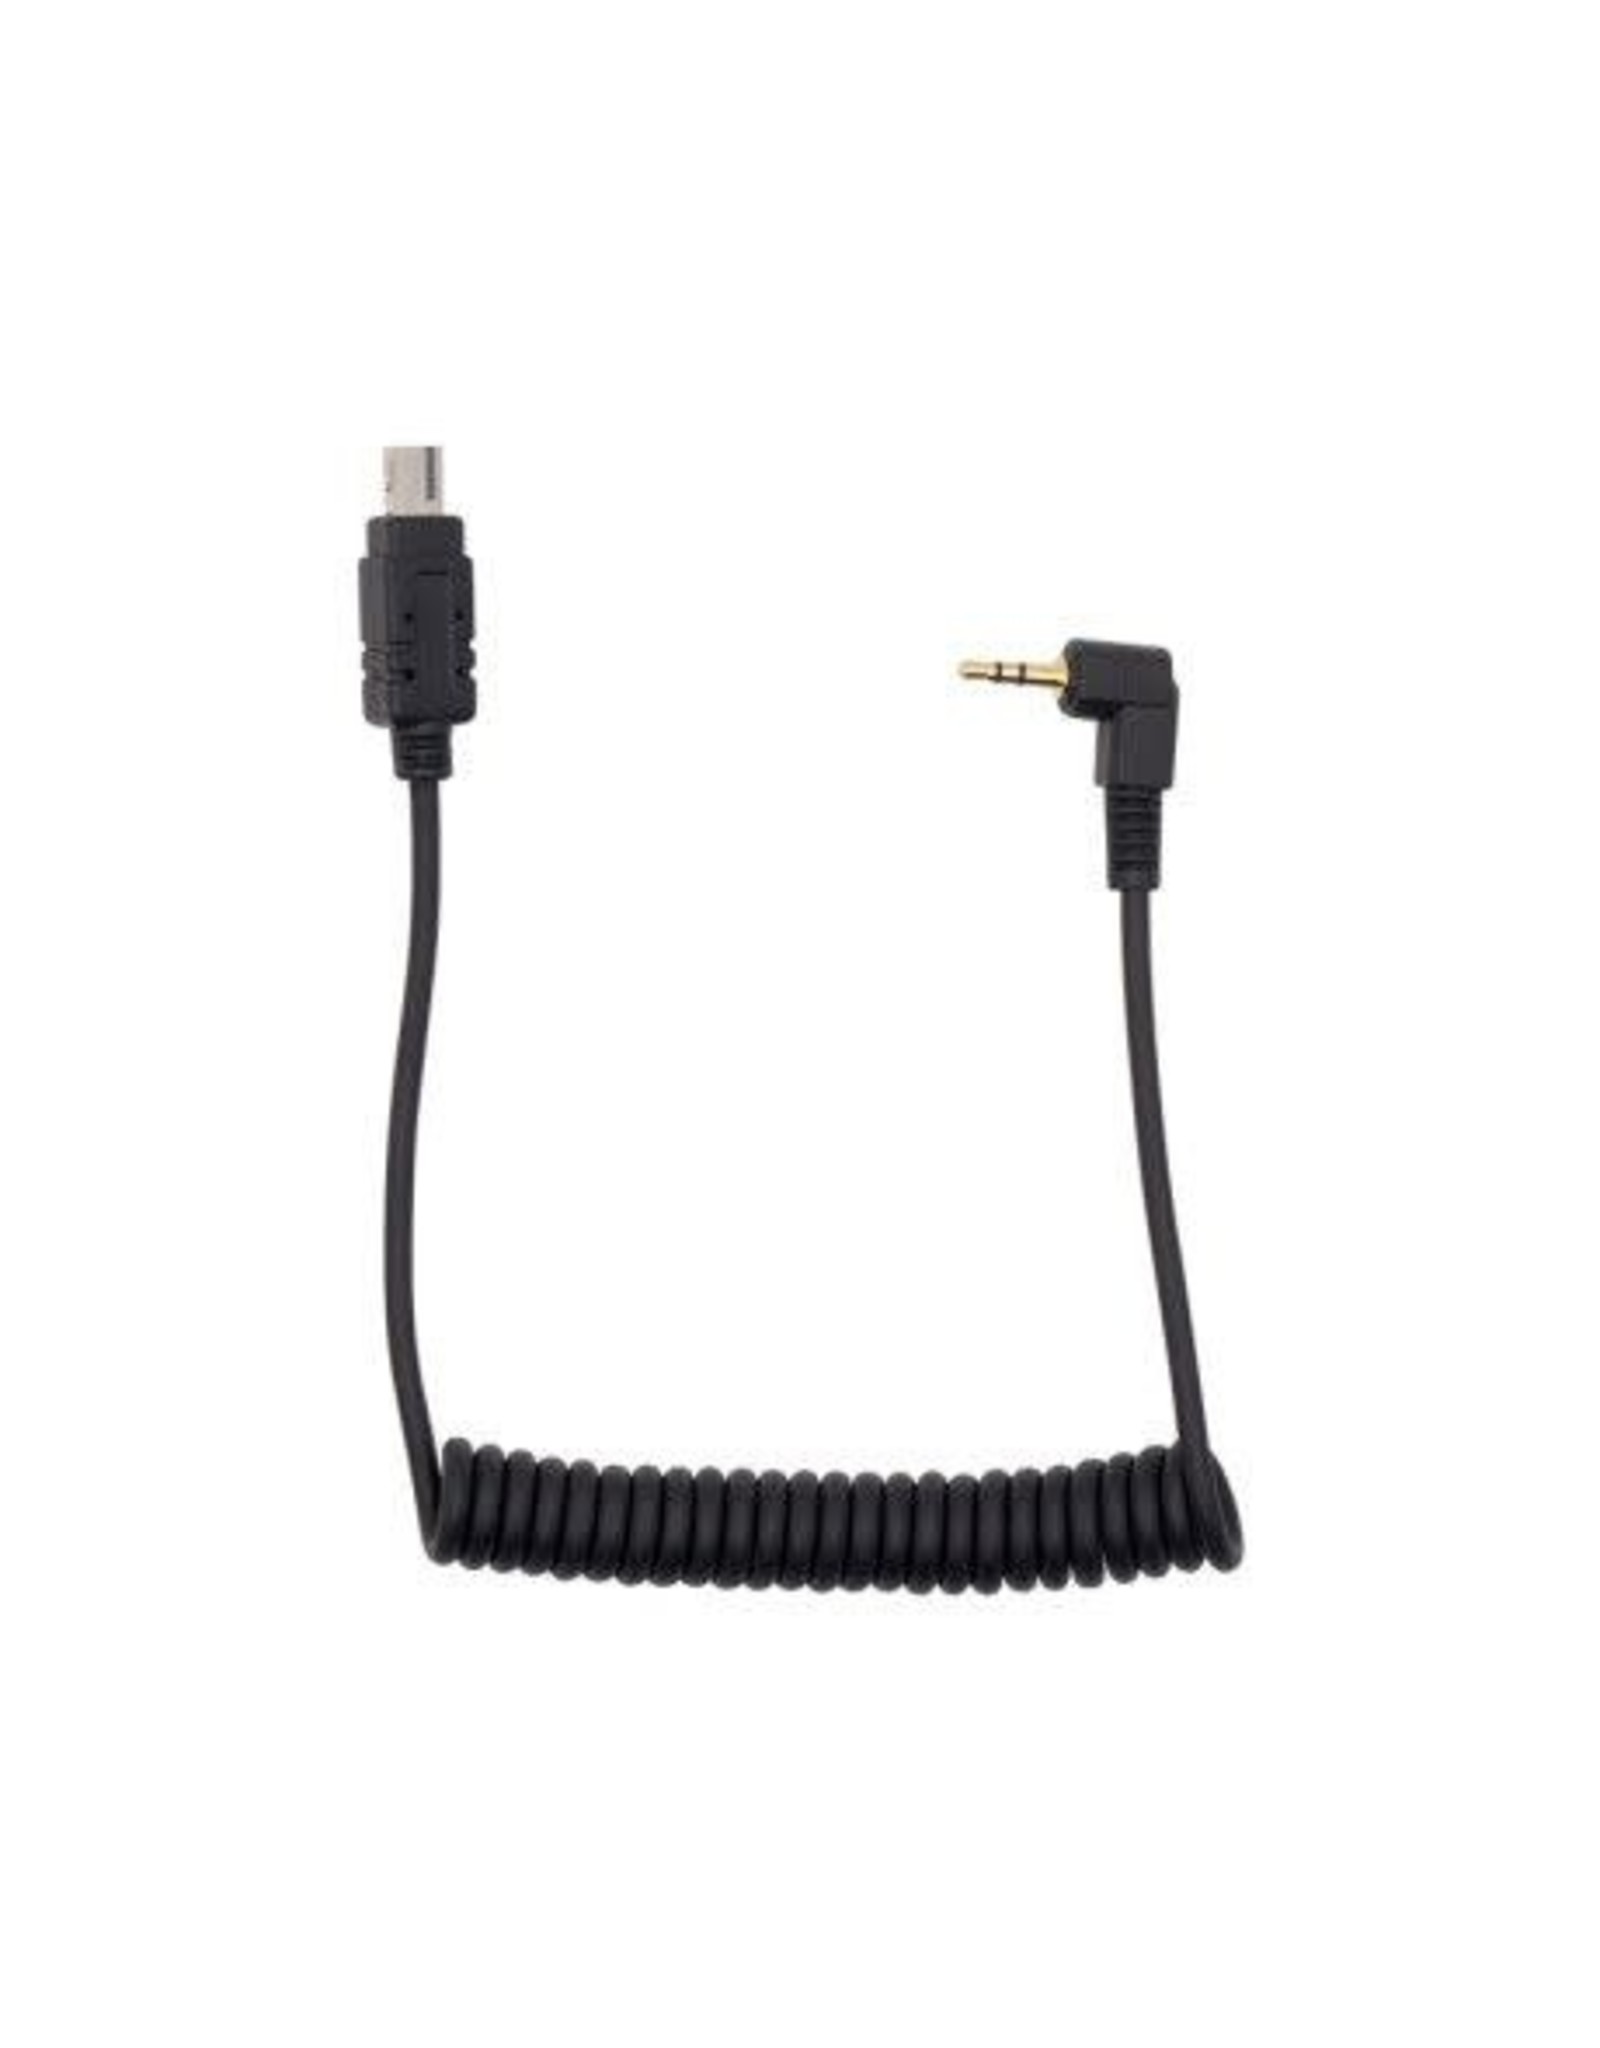 ZWO ZWO ASIAIR Shutter Release N3 Cable